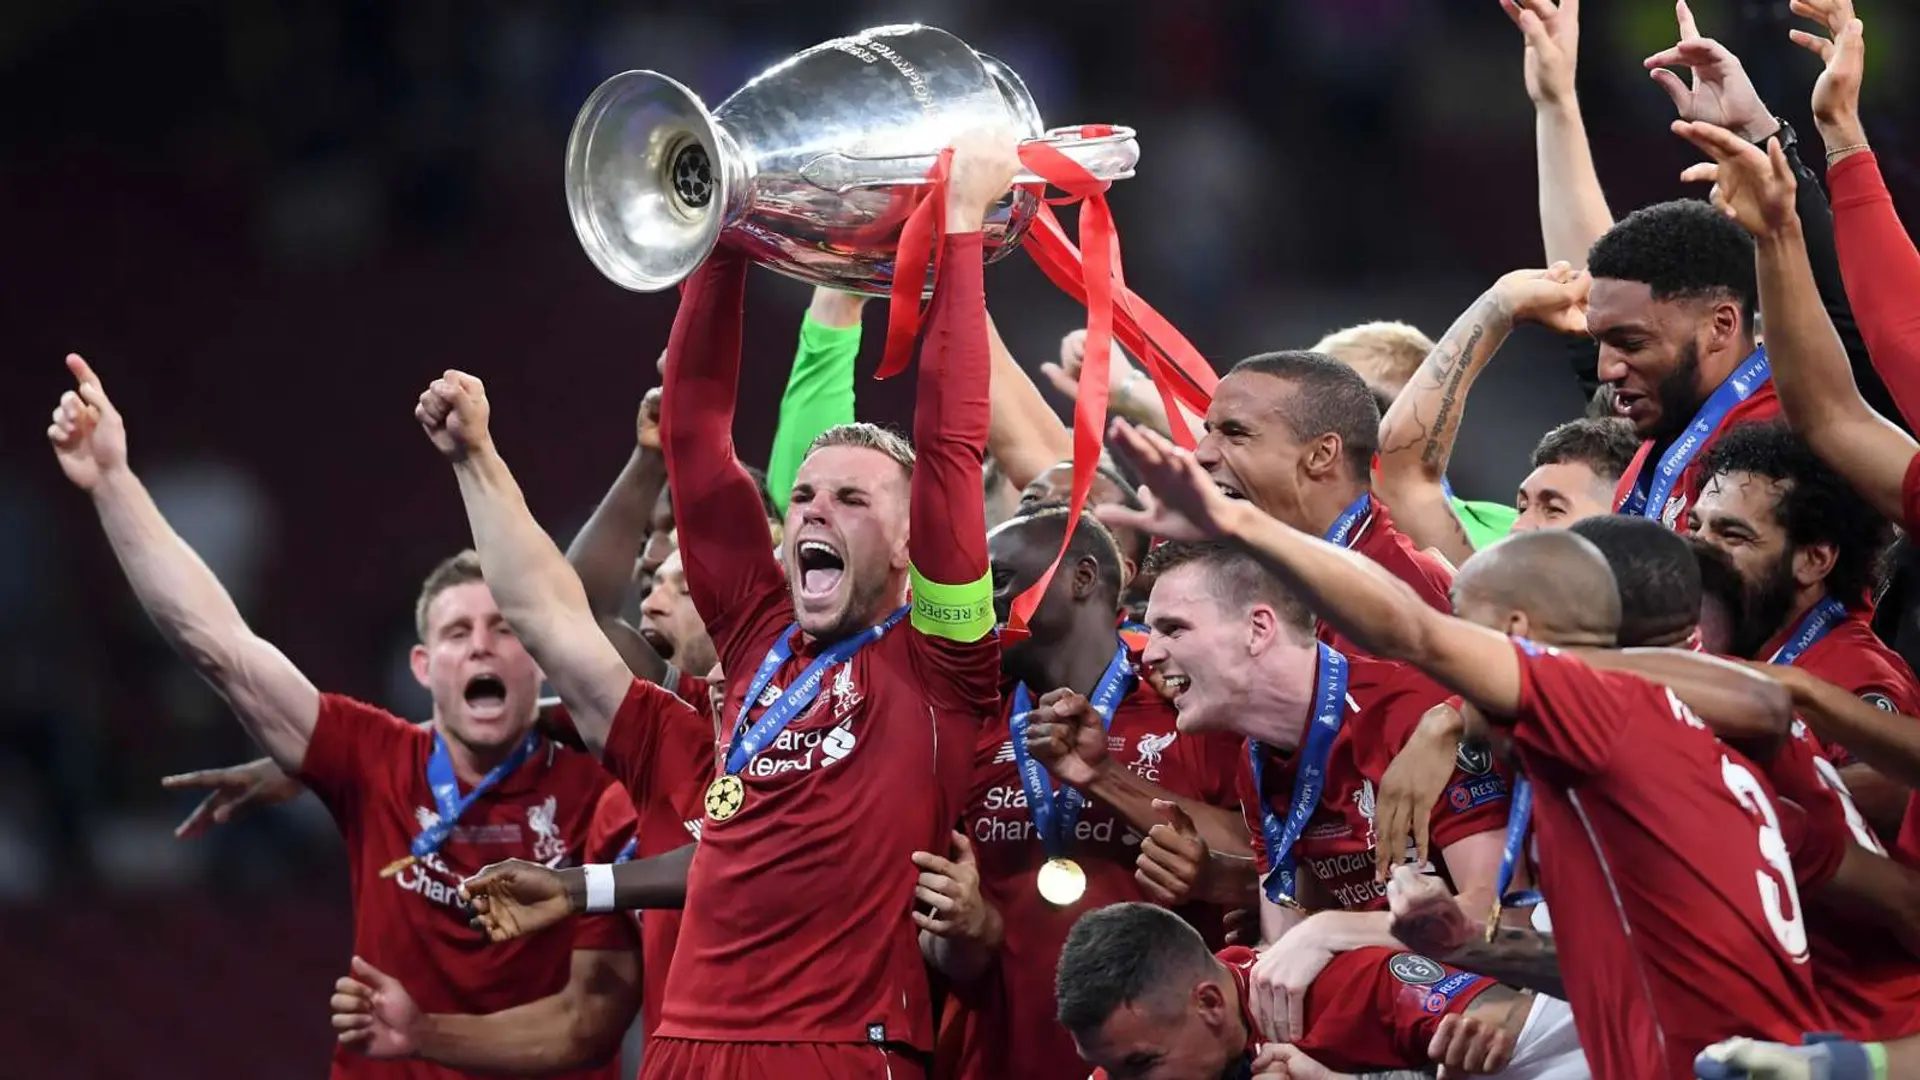 How much prize money do the Champions League 2021 winners get?